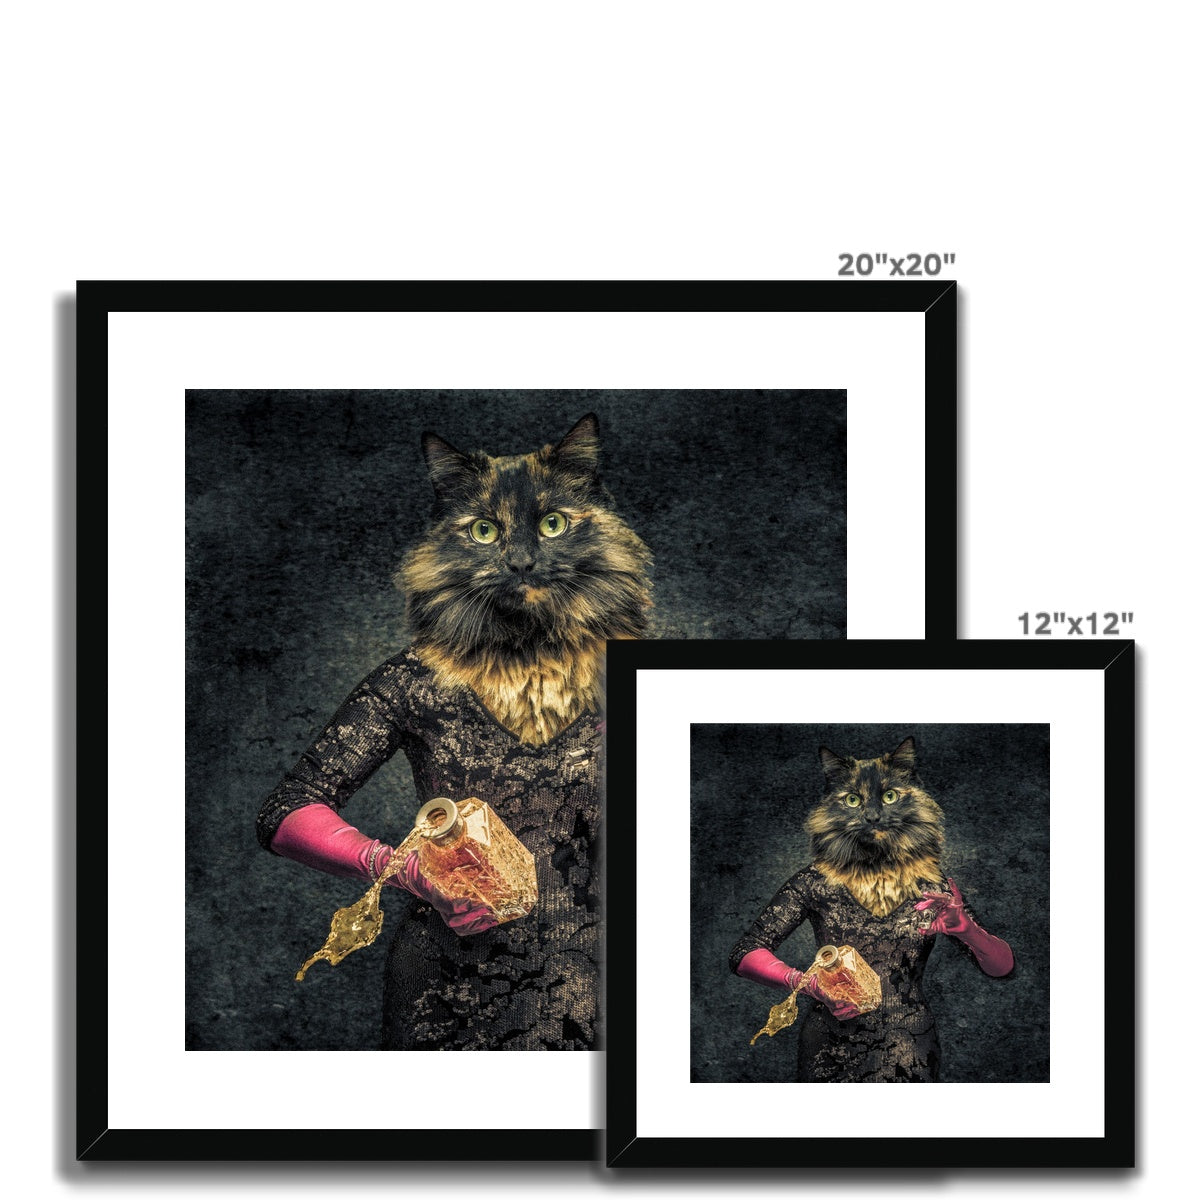 Anthropomorphic cat spilling drink from decanter Framed & Mounted Print